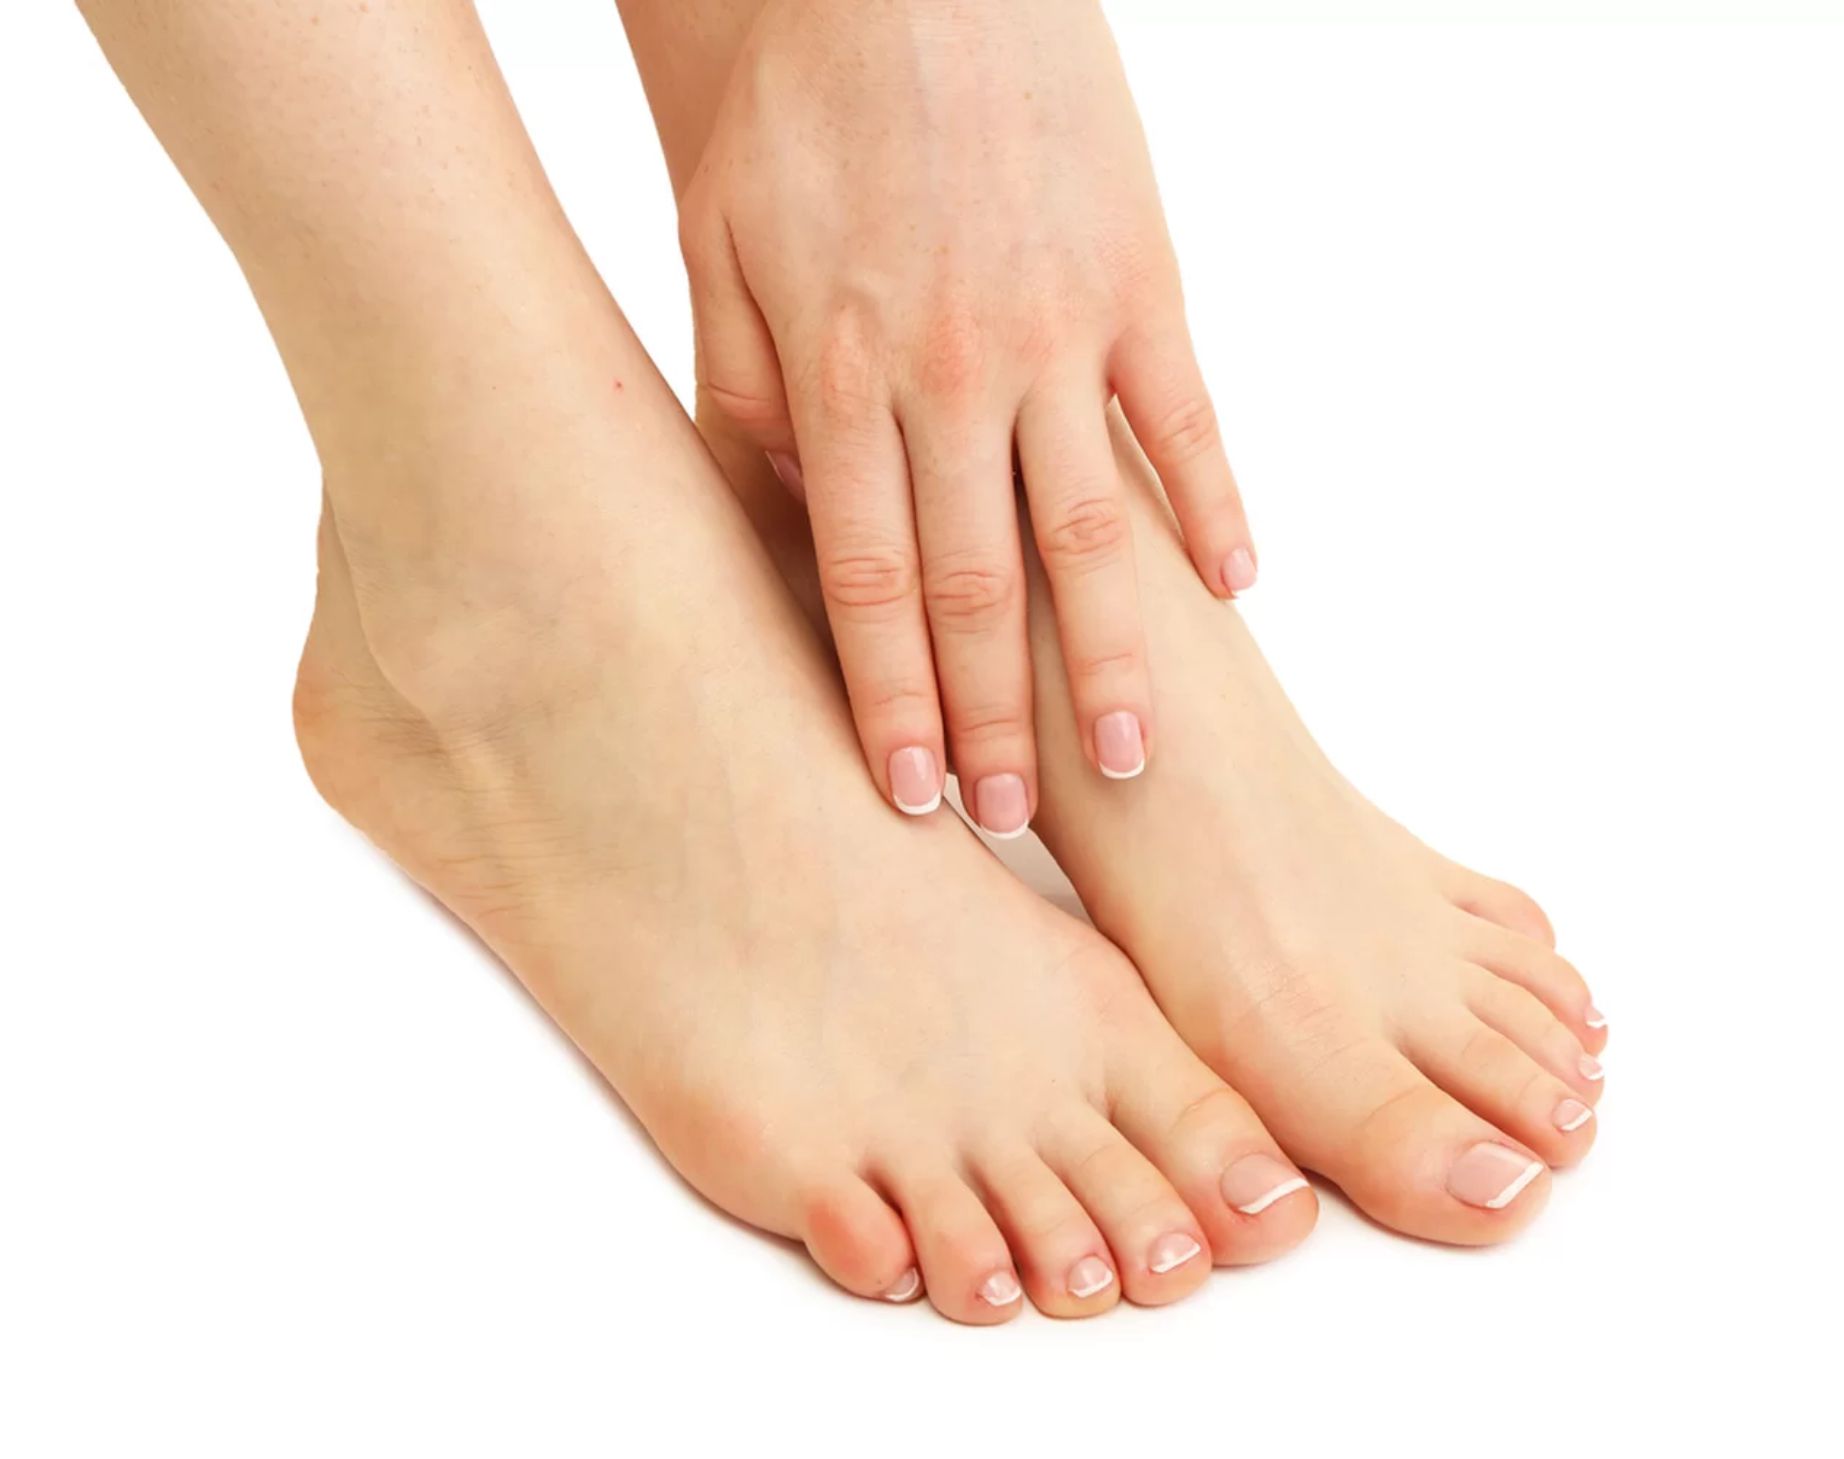 Laser Fungal Nail Treatment in Plymouth, South Devon